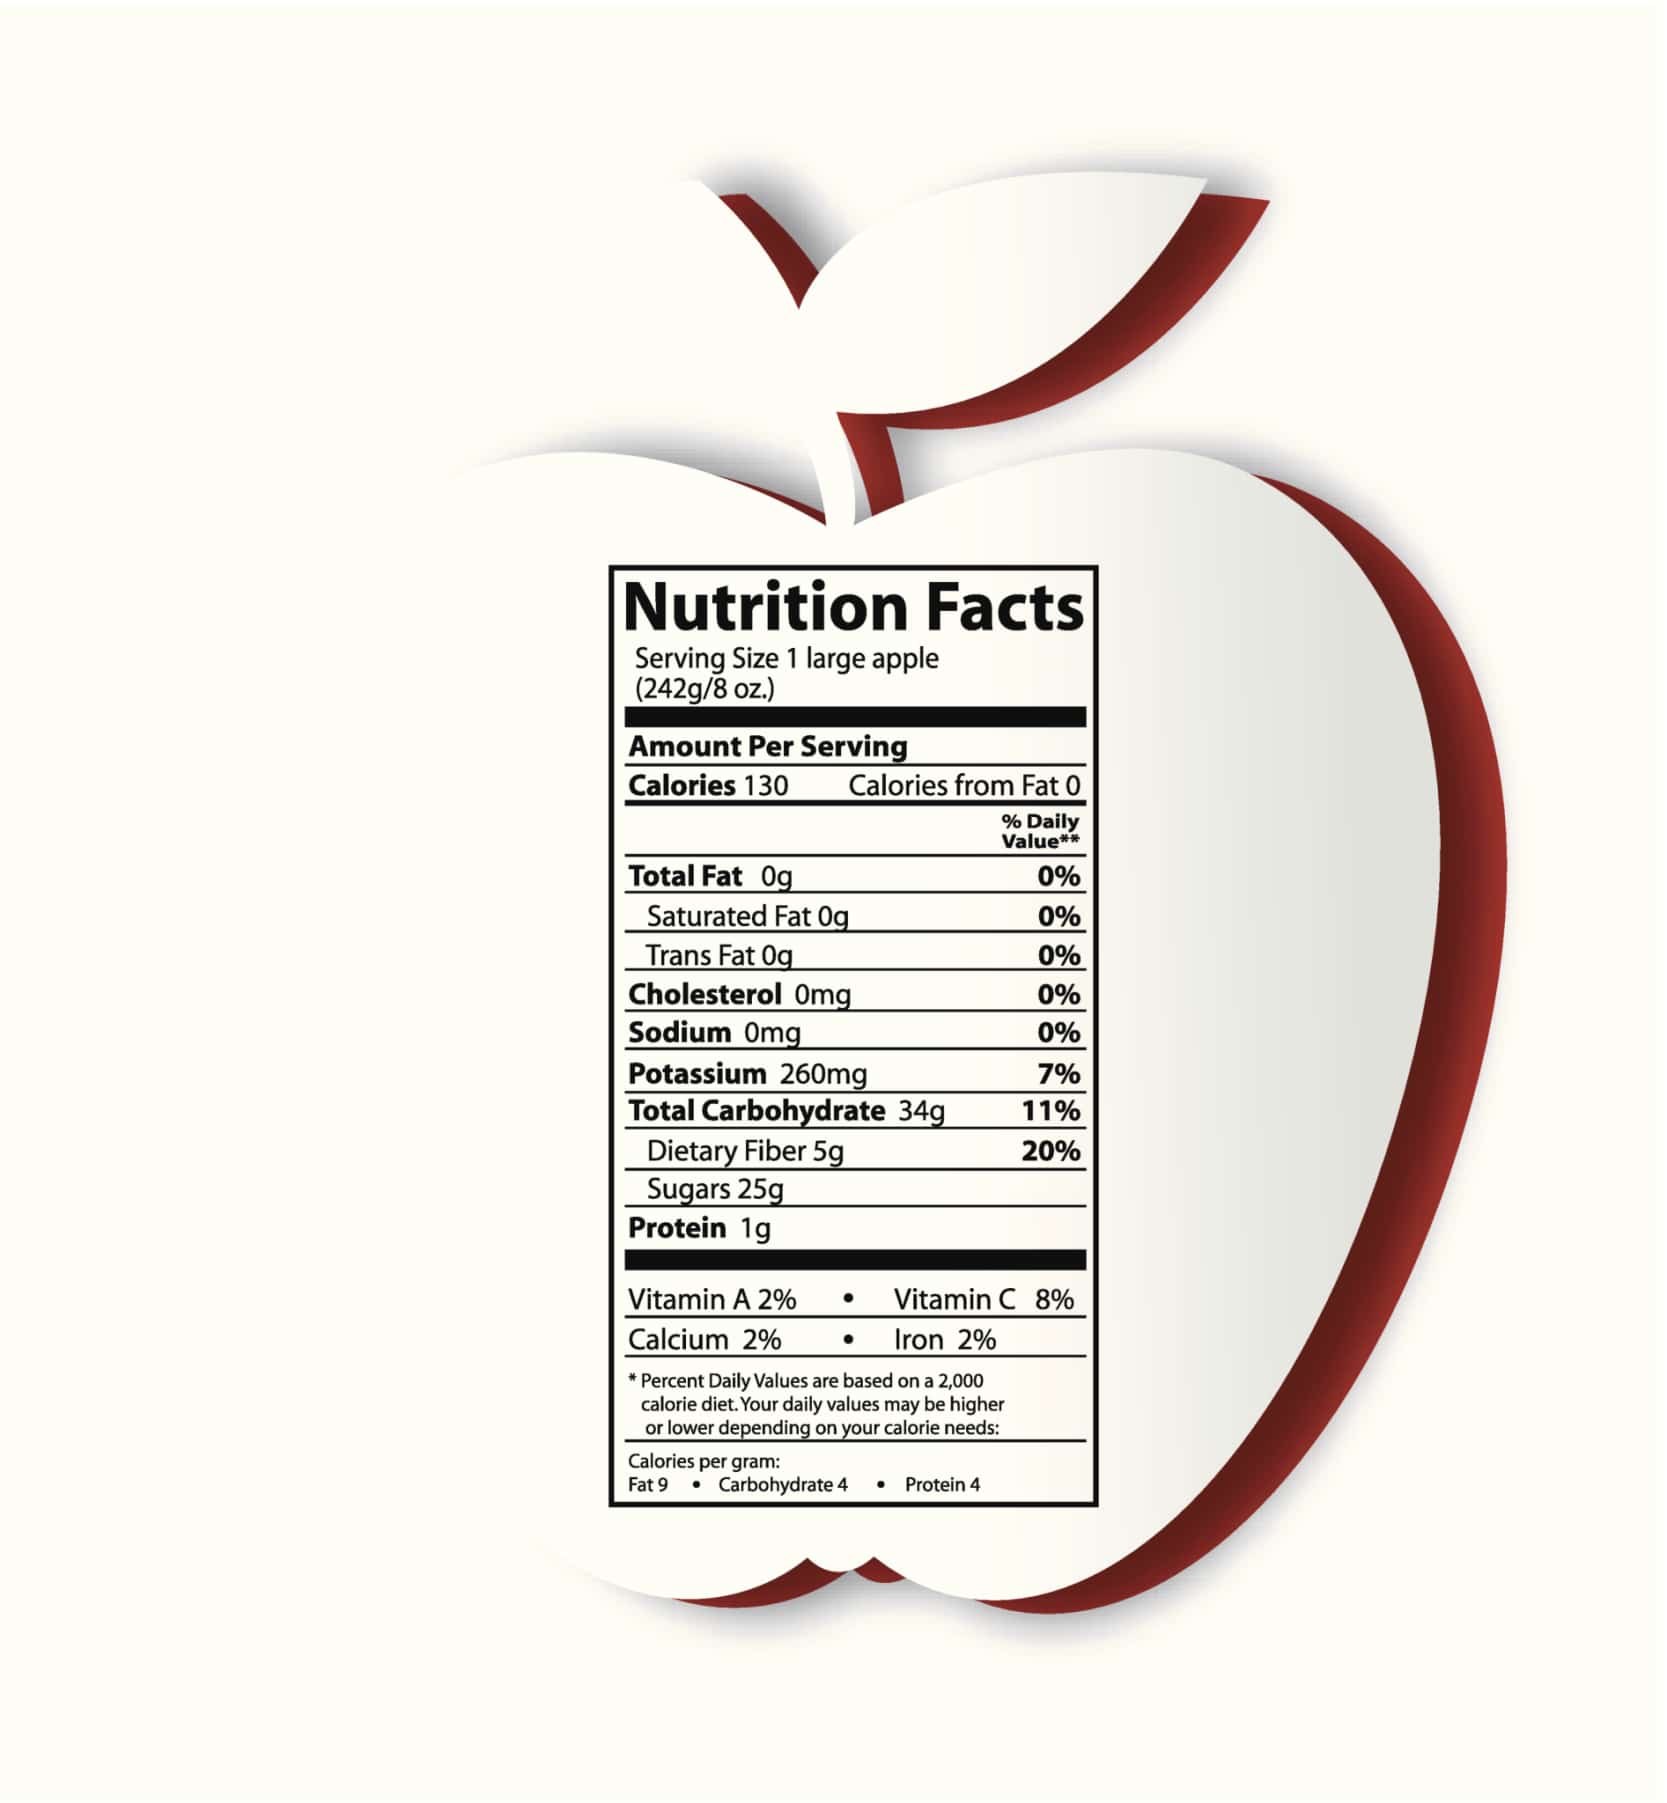 Picture of nutritional label